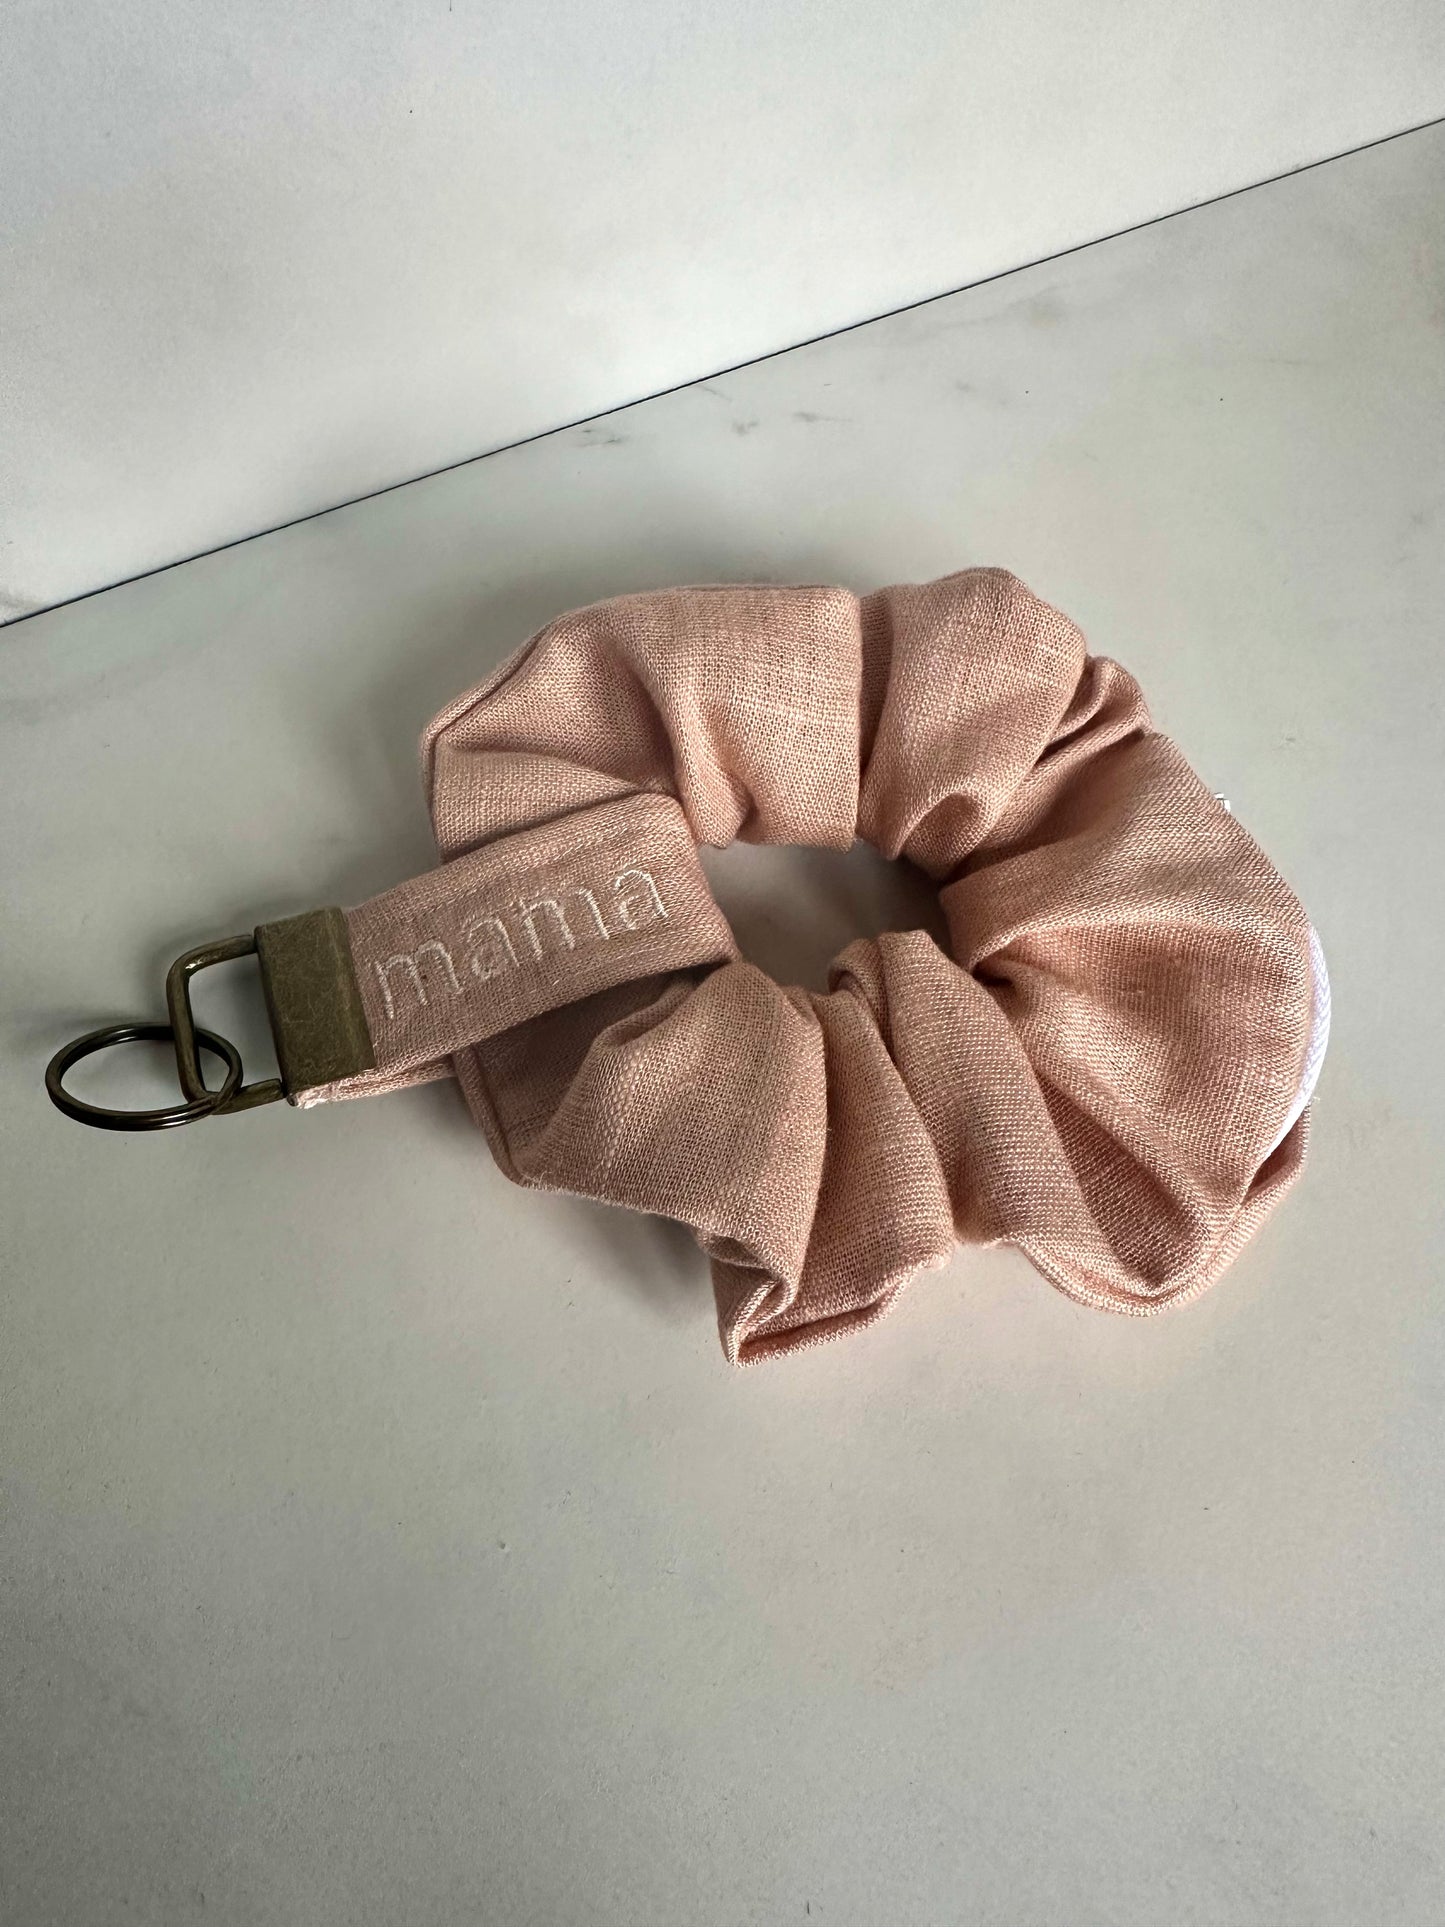 Embroidered Scrunchie Key Chain with Zipper